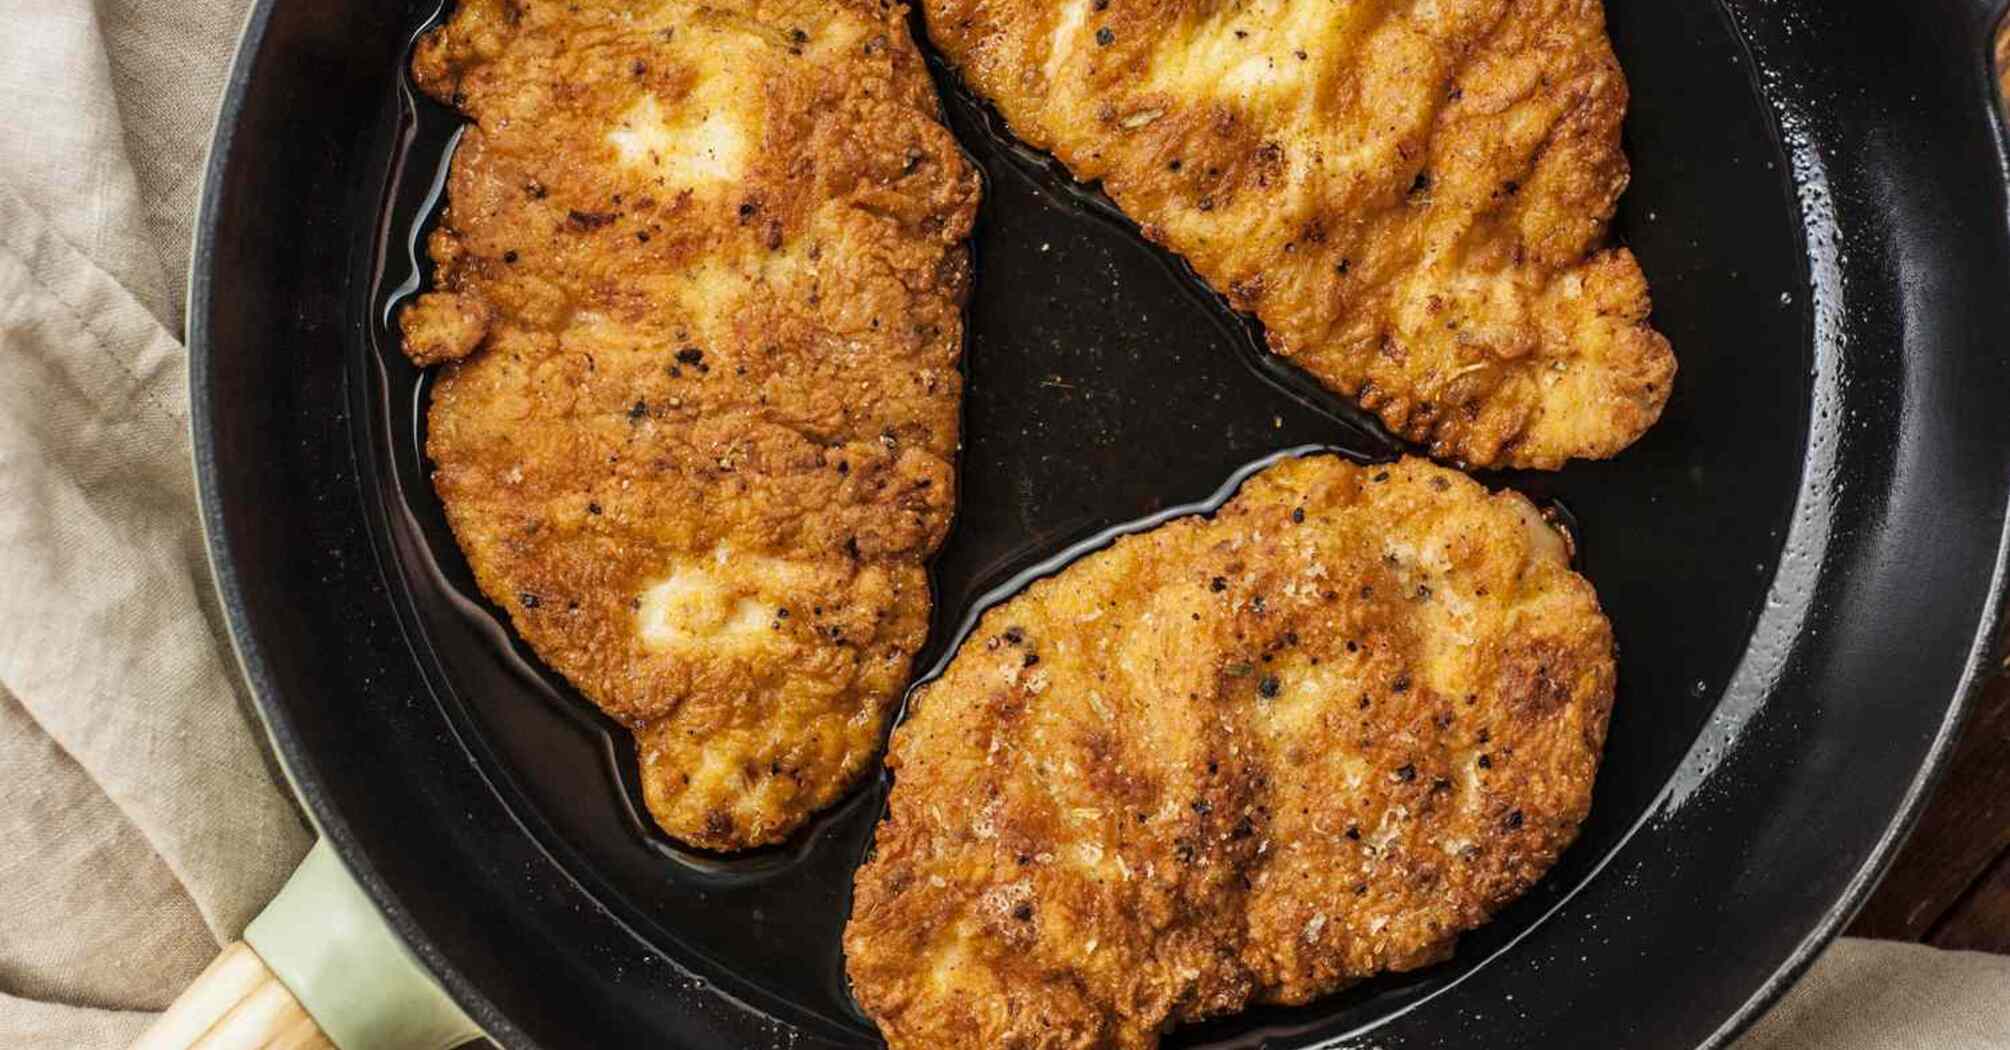 How to fry frozen cutlets